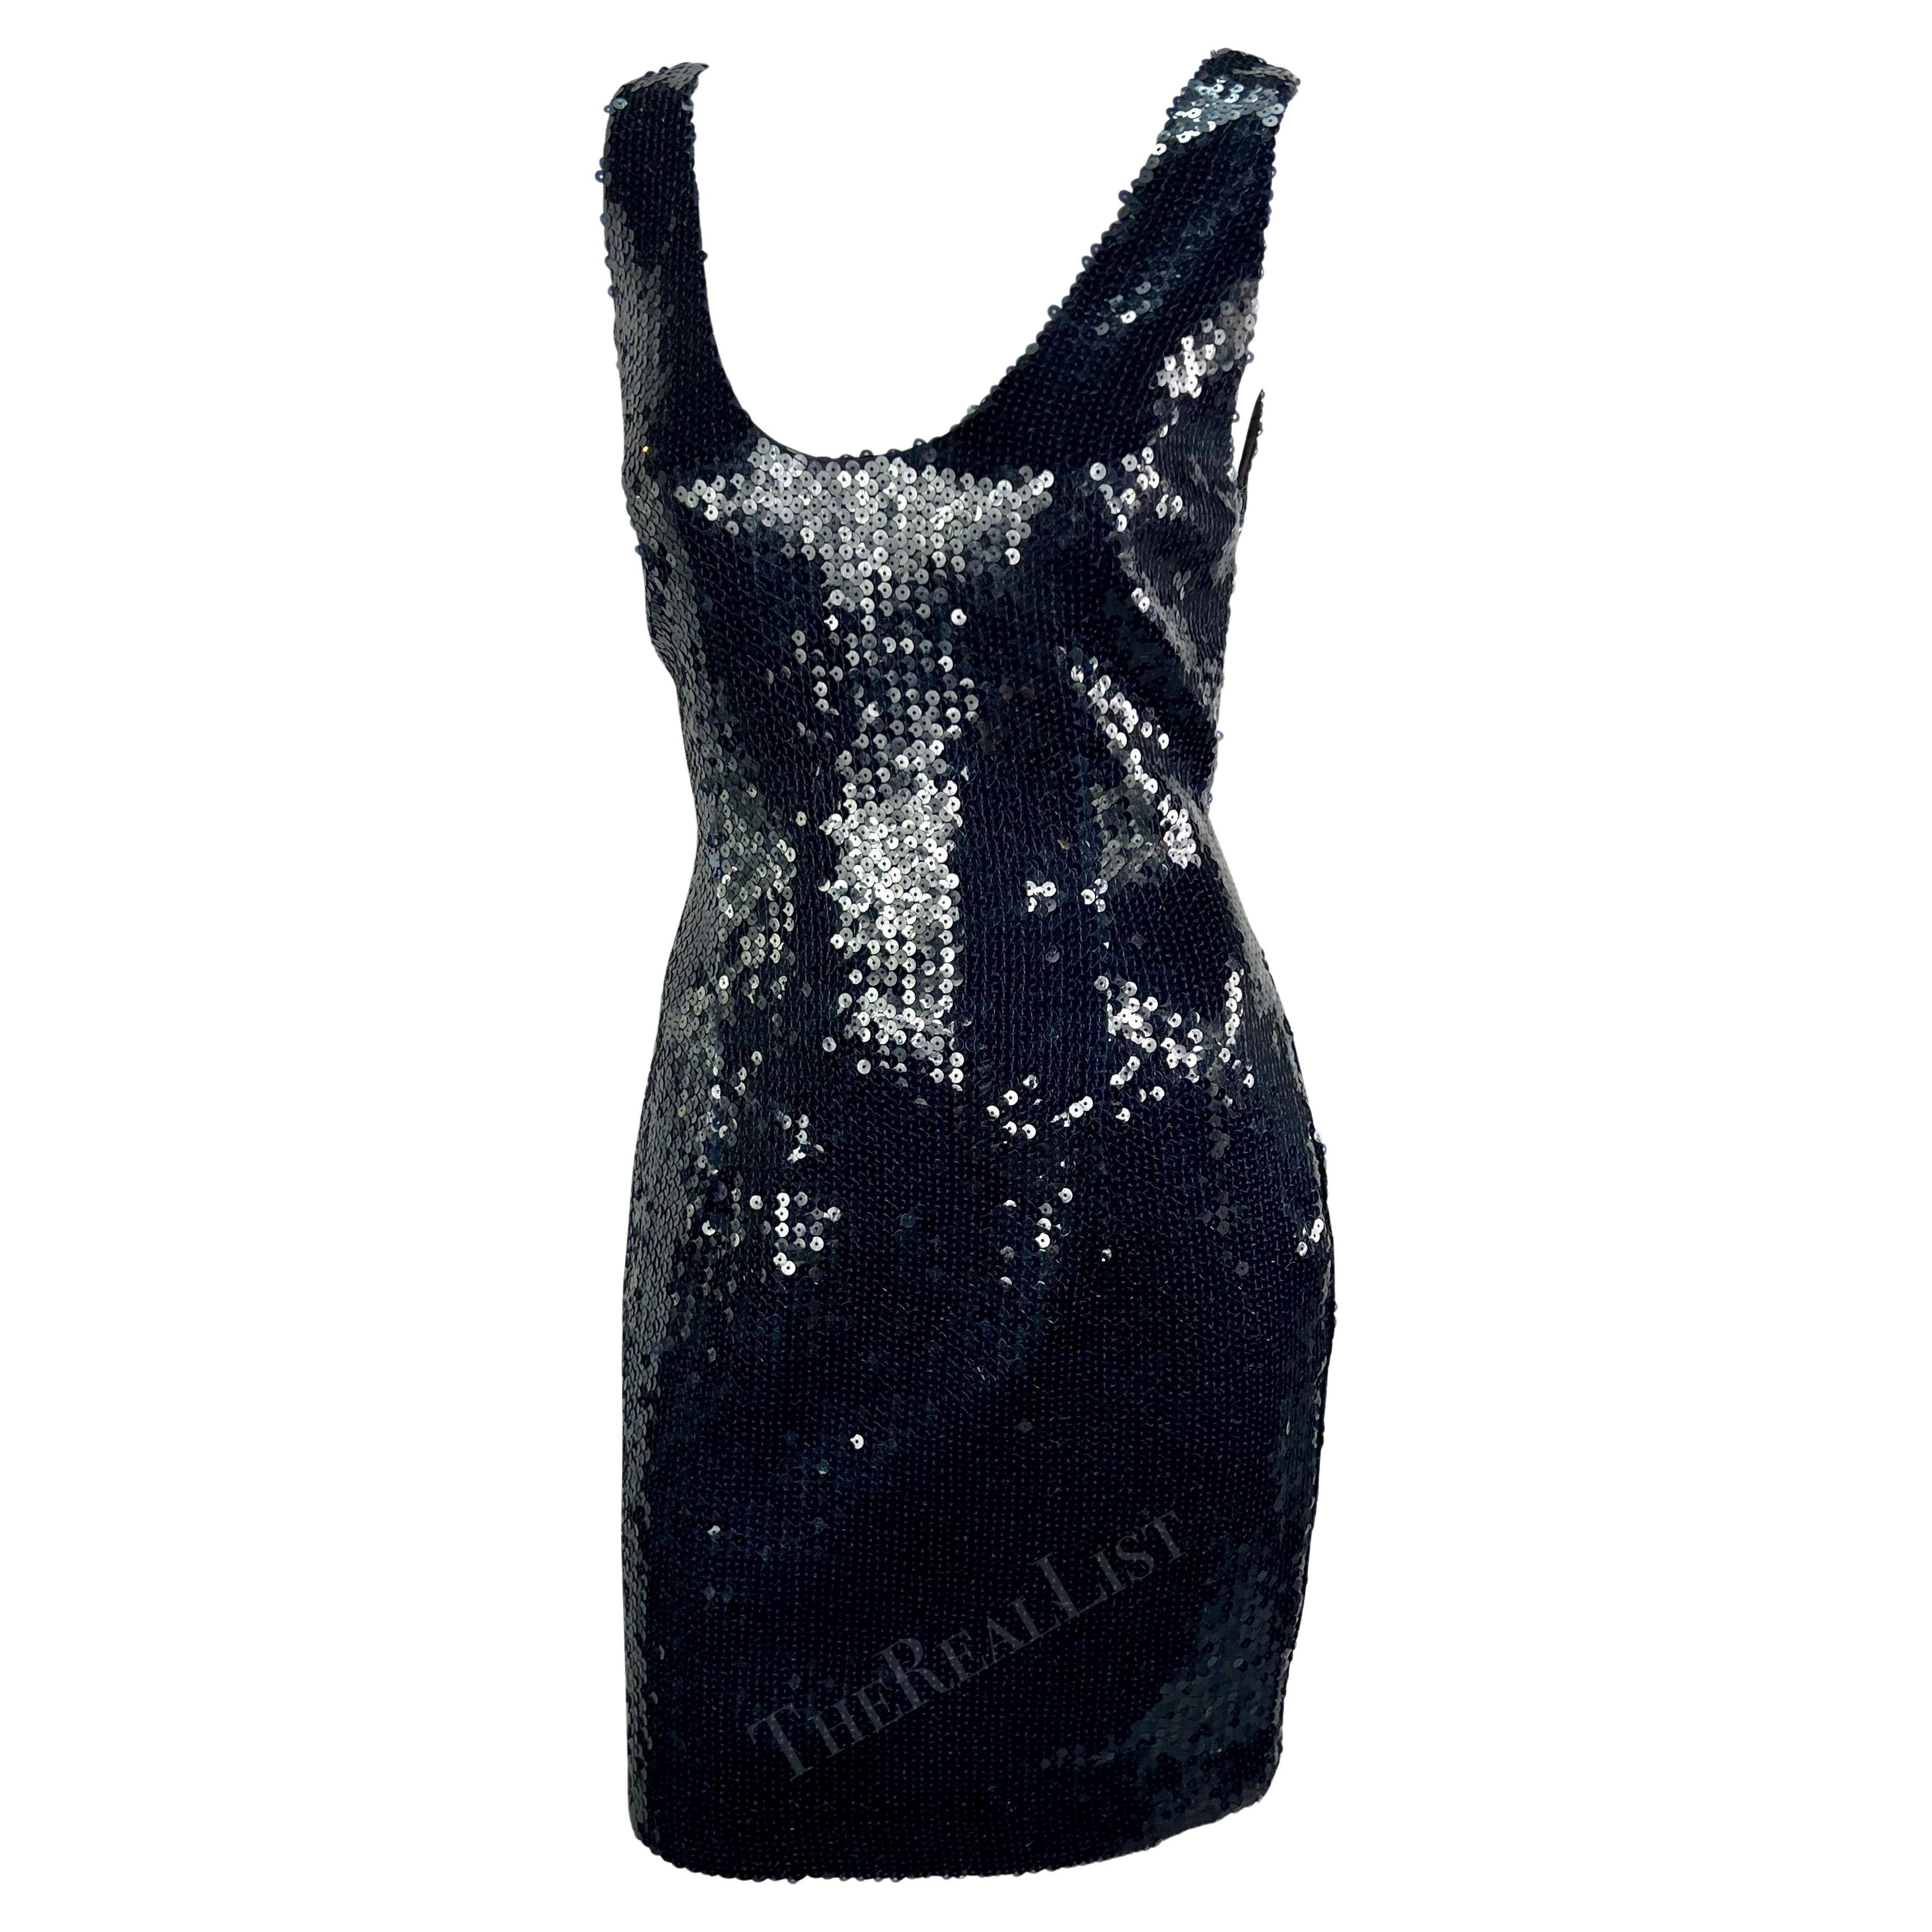 Presenting a fabulous deep blue sequin mini dress by Jil Sander from the late 1980s. This stunning dress is adorned with dark blue sequins throughout The sleeveless dress features wide straps and a low scoop neckline. Add this chic sparkly vintage